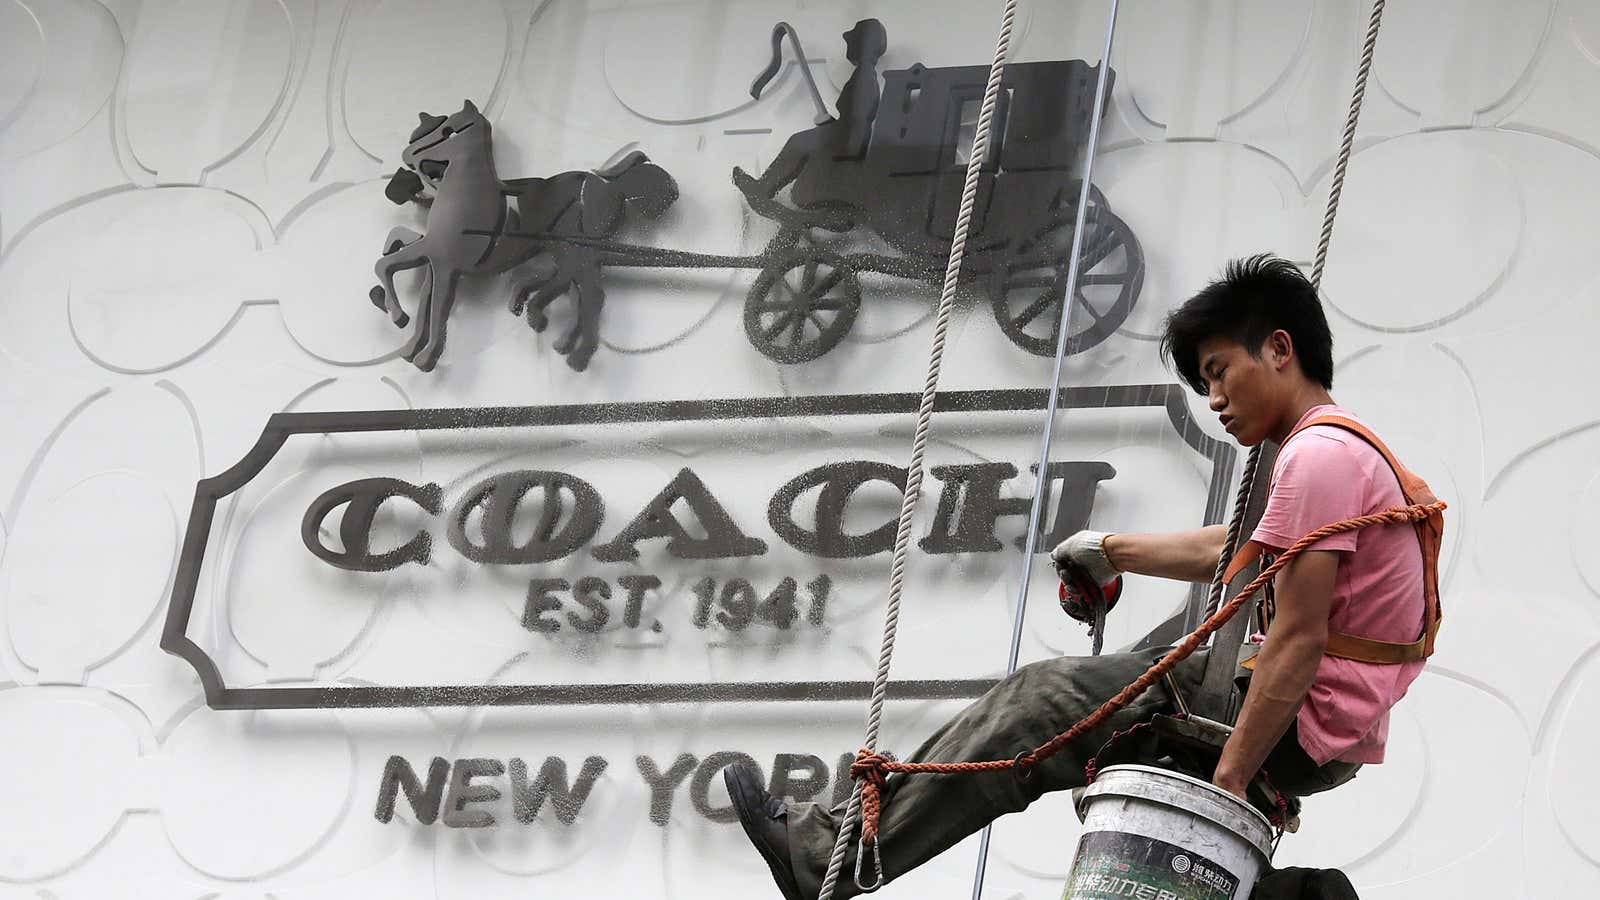 Coach’s sales are falling in the US, but climbing in China.